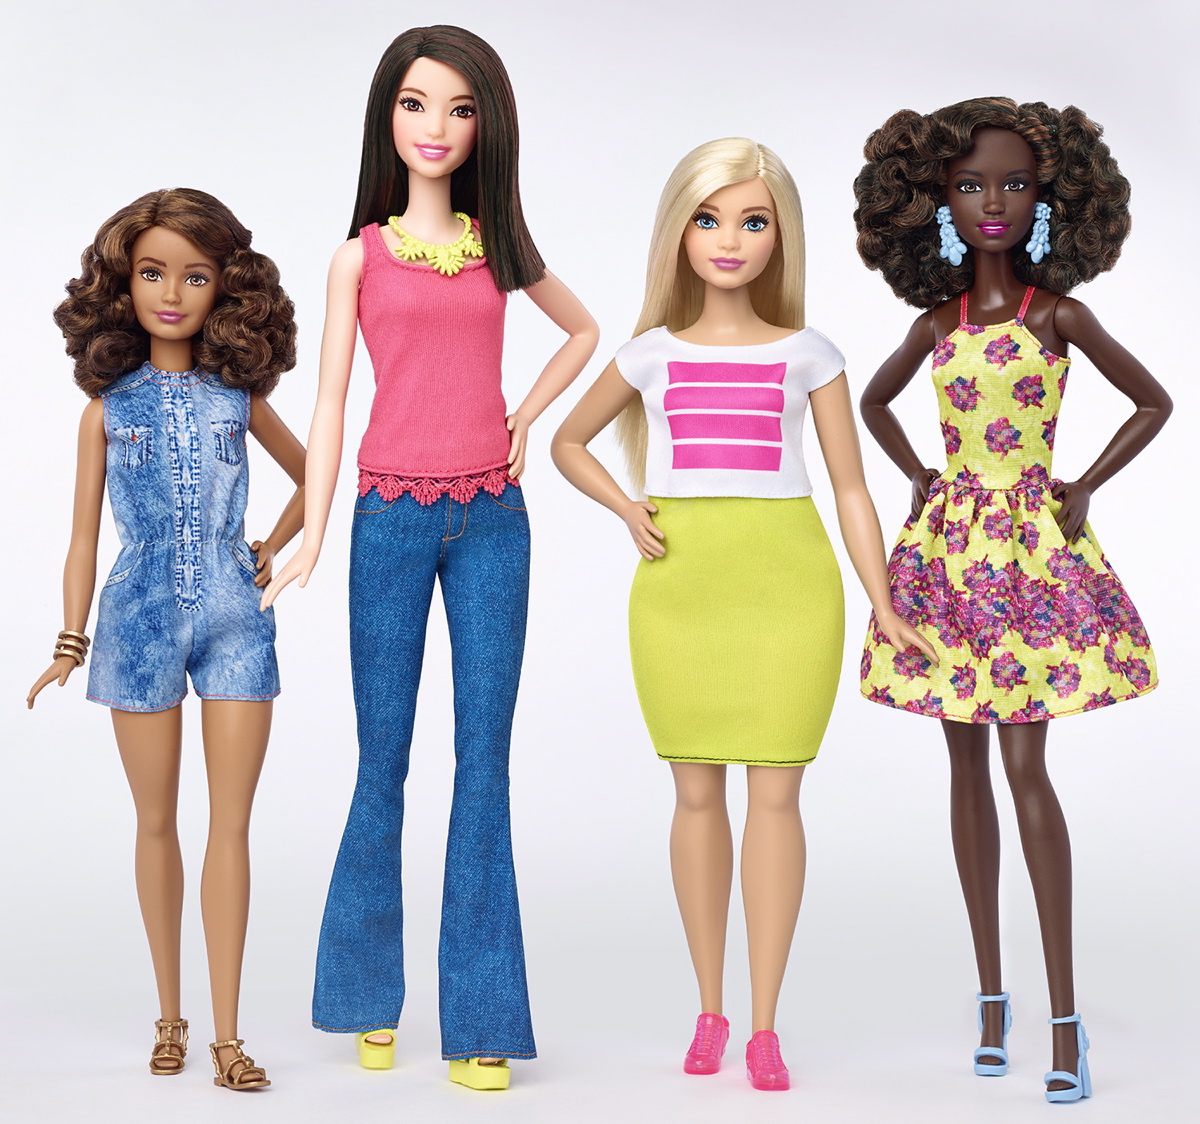 The 2016 Barbie Fashionistas are what many consider to be Mattel's most progressive collection of dolls, which includes different body types, skin tones, eye color and hairstyles. Mattel has faced criticism over the years for not creating Barbie dolls that represent the diversity of modern-day women.